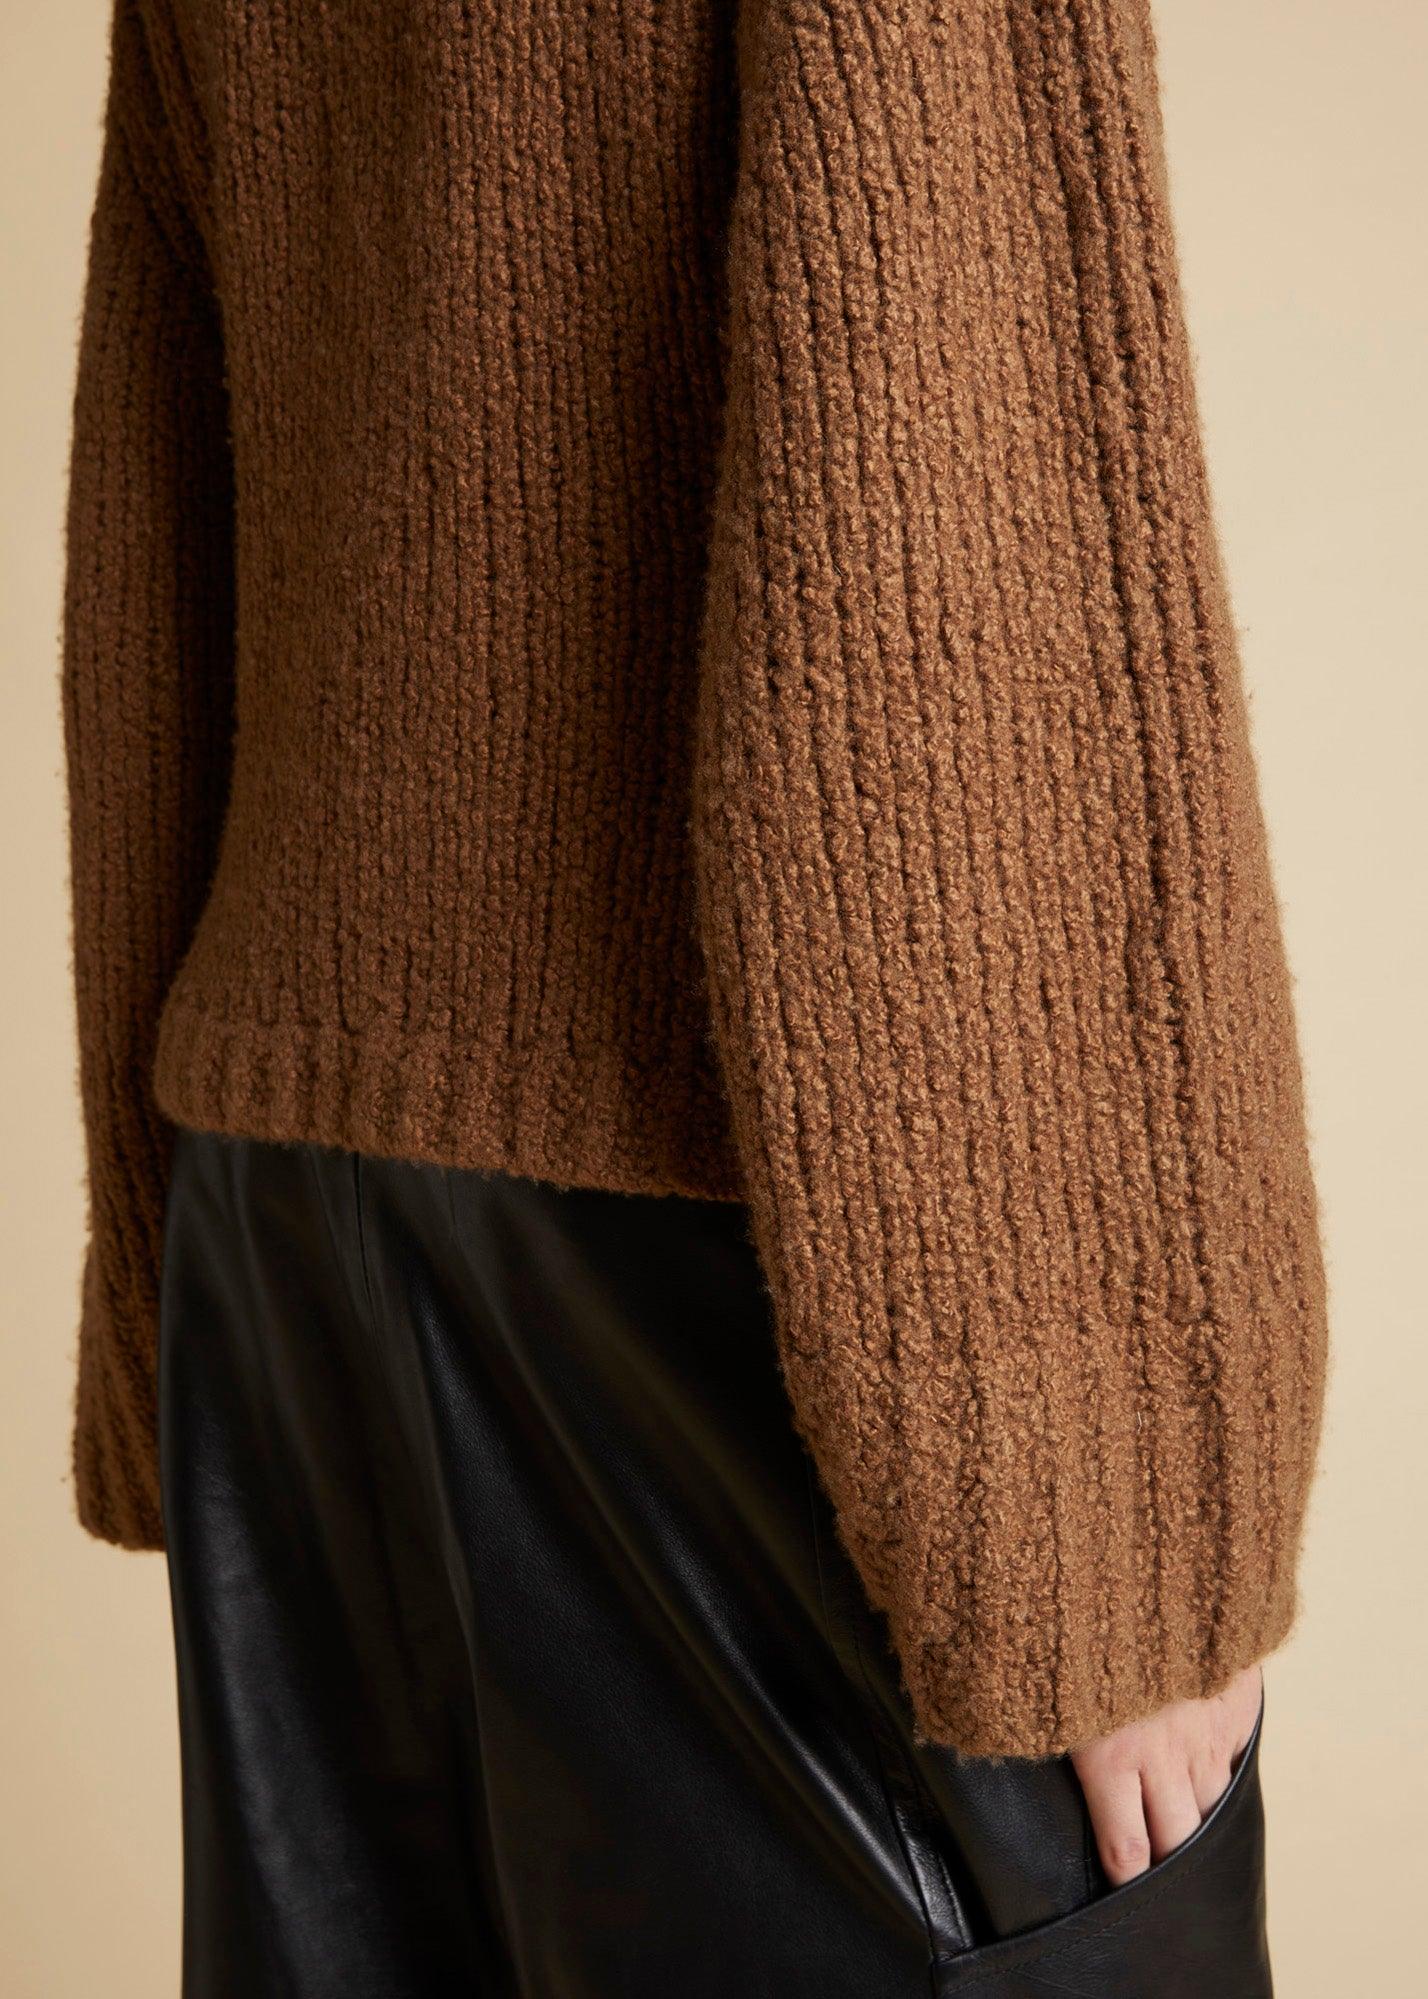 The Scarlet Cardigan in Toffee - The Iconic Issue